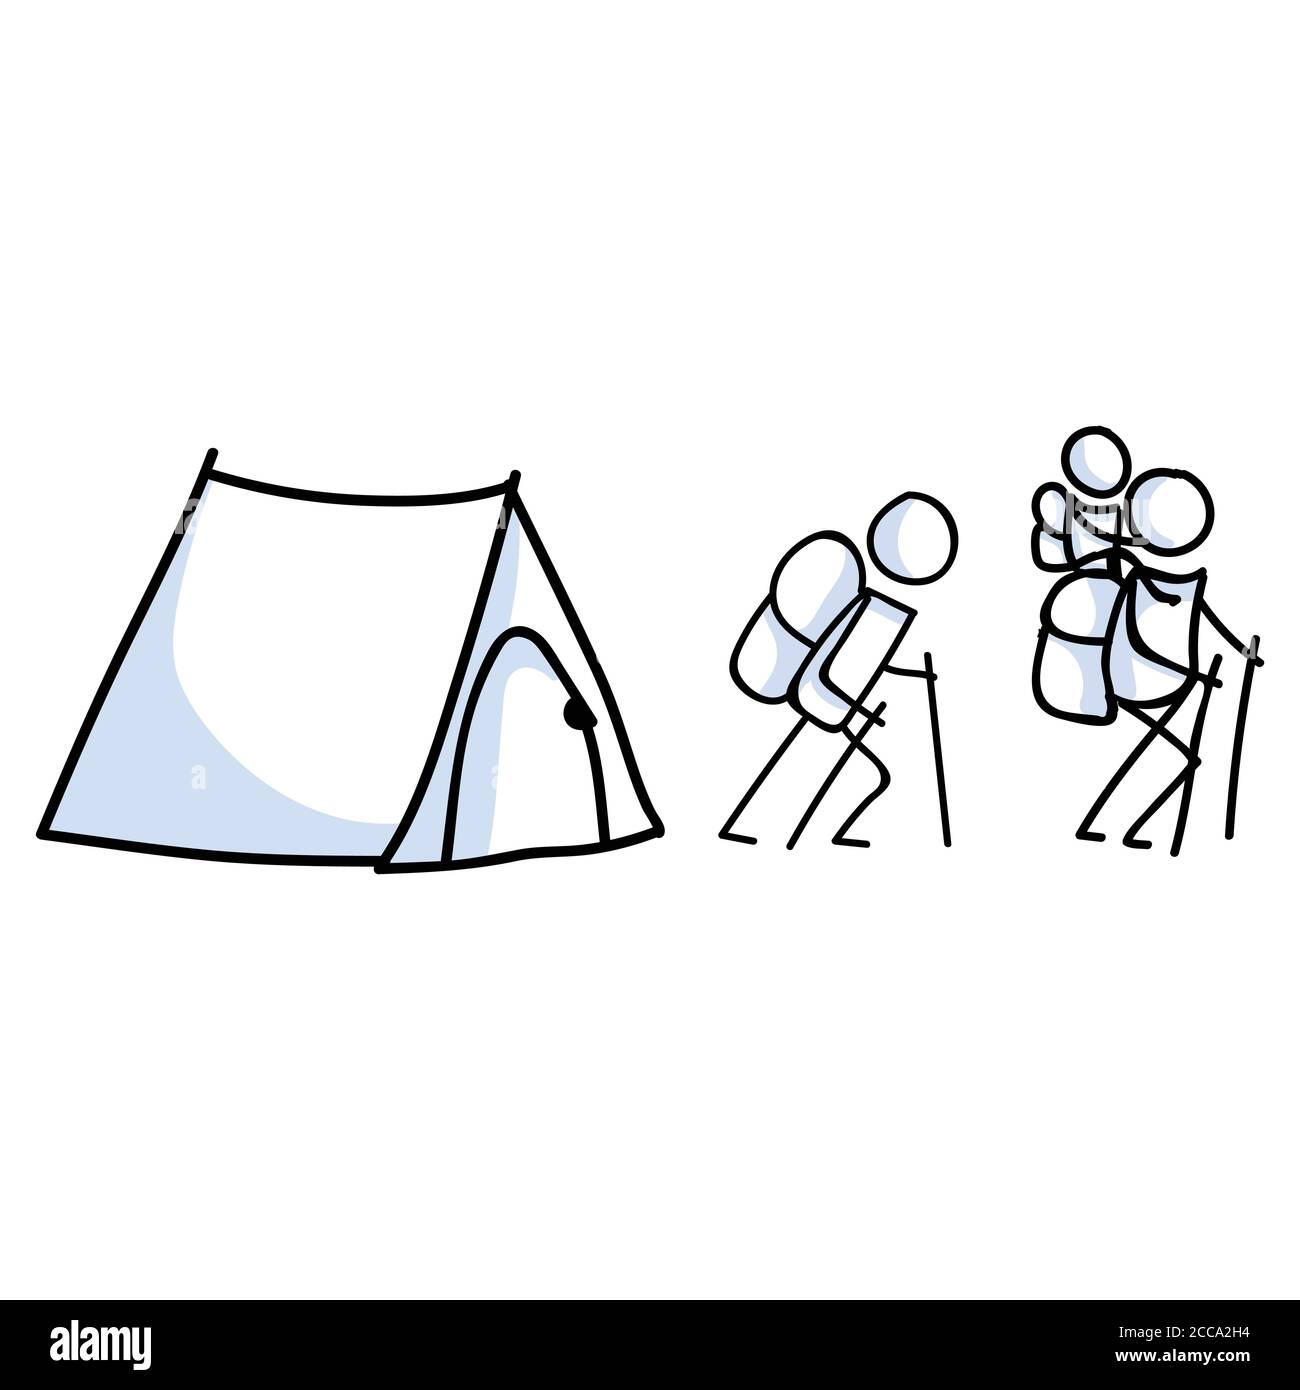 Hand drawn stickman camping family concept. Simple outdoor vacation doodle icon for staycation, family travel adventure clipart. Simple getaway figure Stock Vector